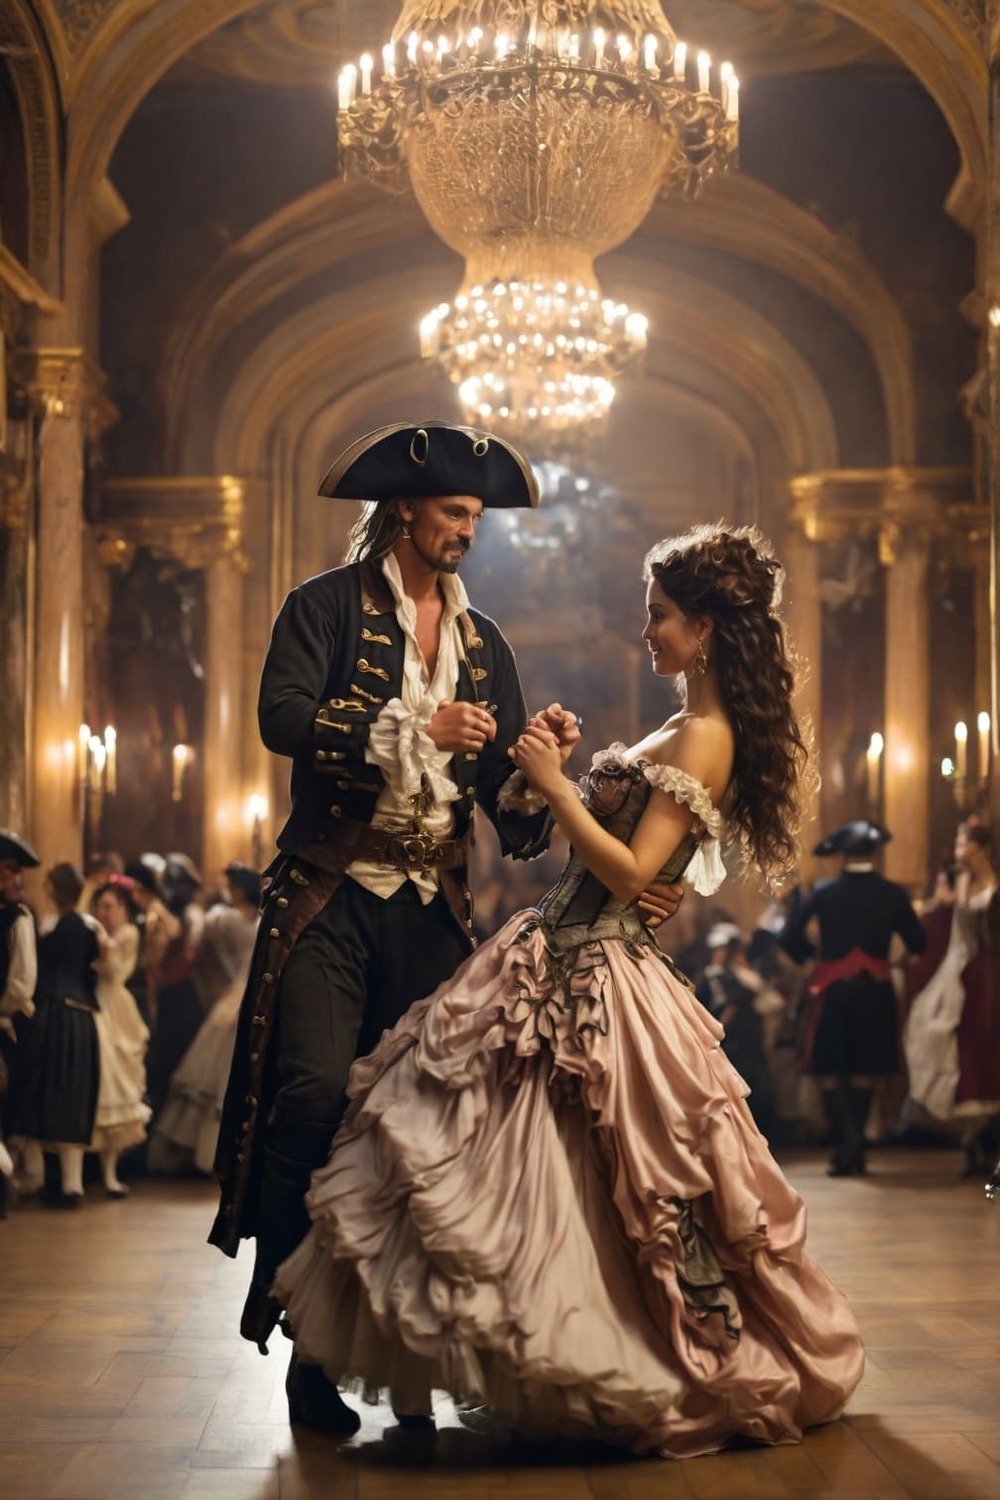 pirates, ball, palace, retro, ladies, dancing pinterest preview image.